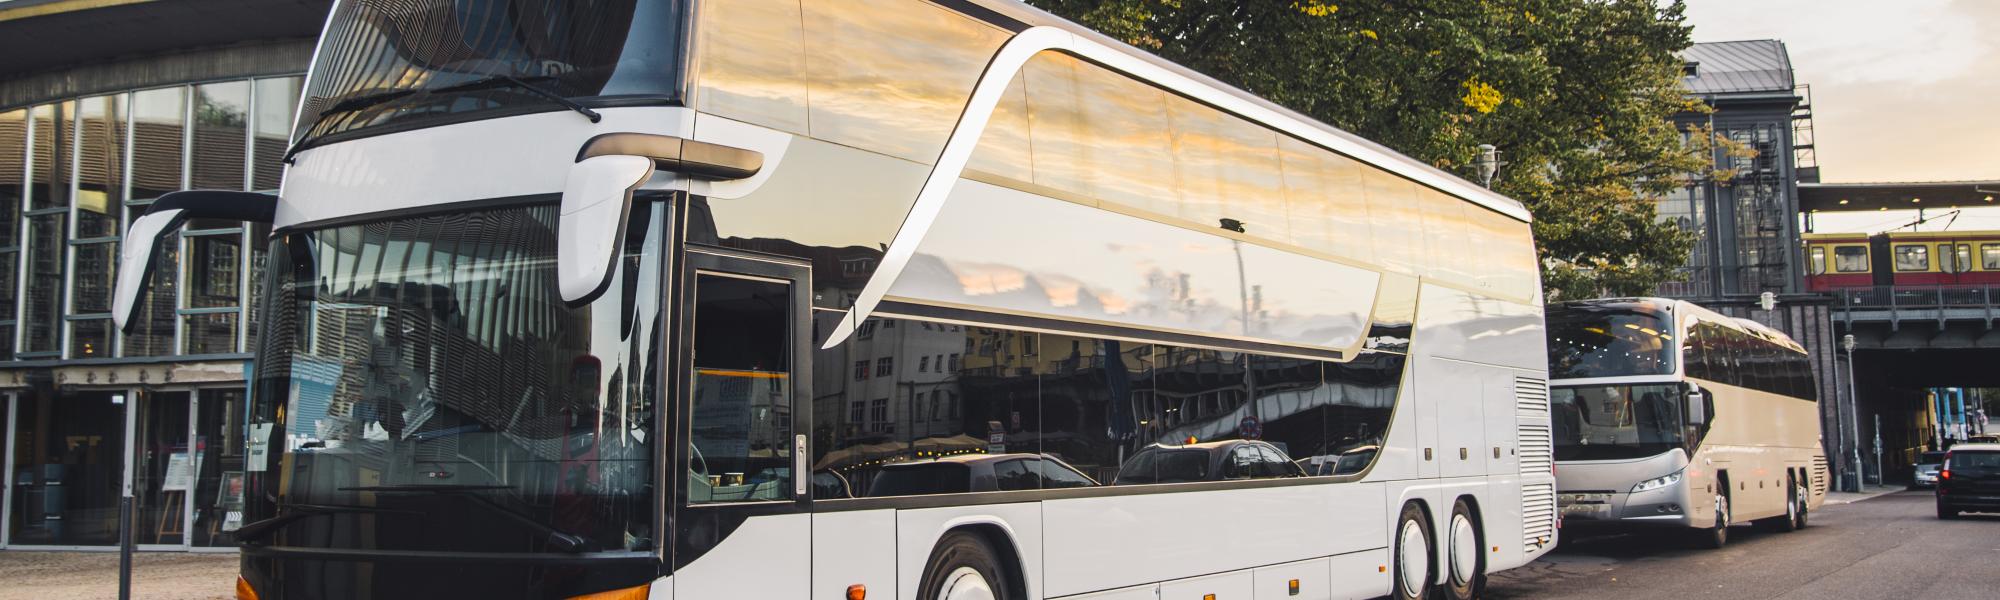 EU finally proposes driving and rest time rules apt for coach tourism